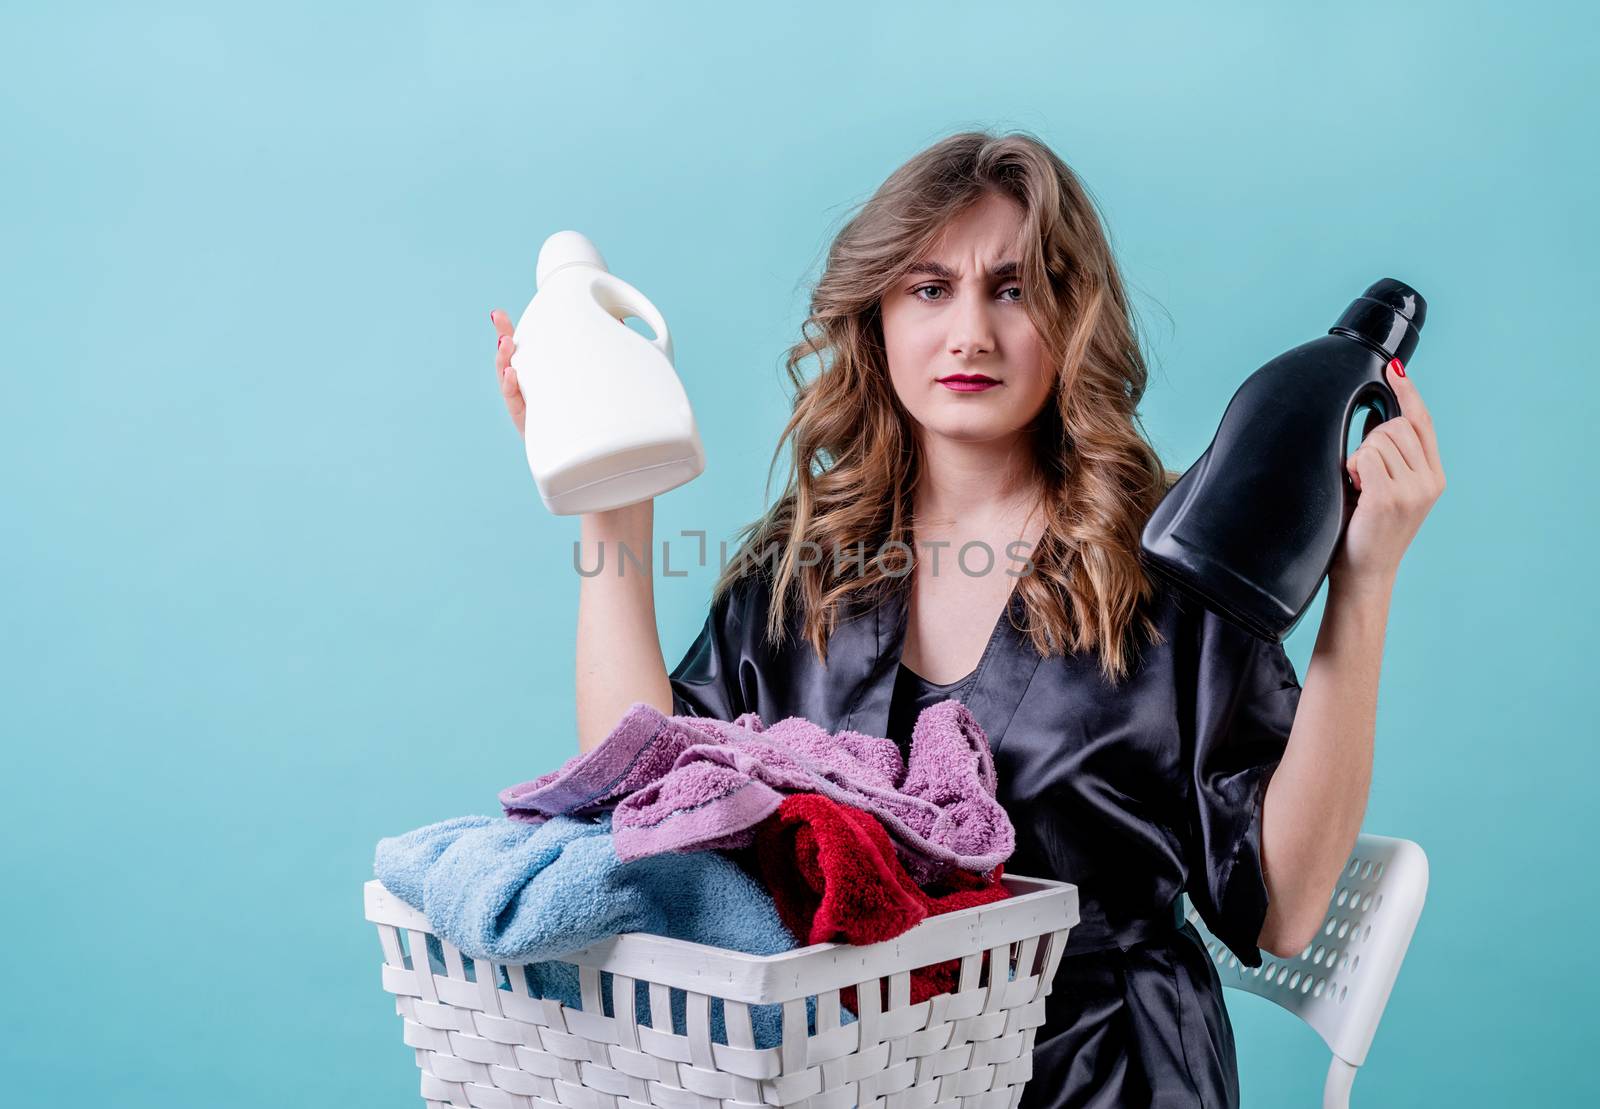 puzzled housewife holding a basket of clothes and detergent bottles ready for laundry isolated on blue background by Desperada